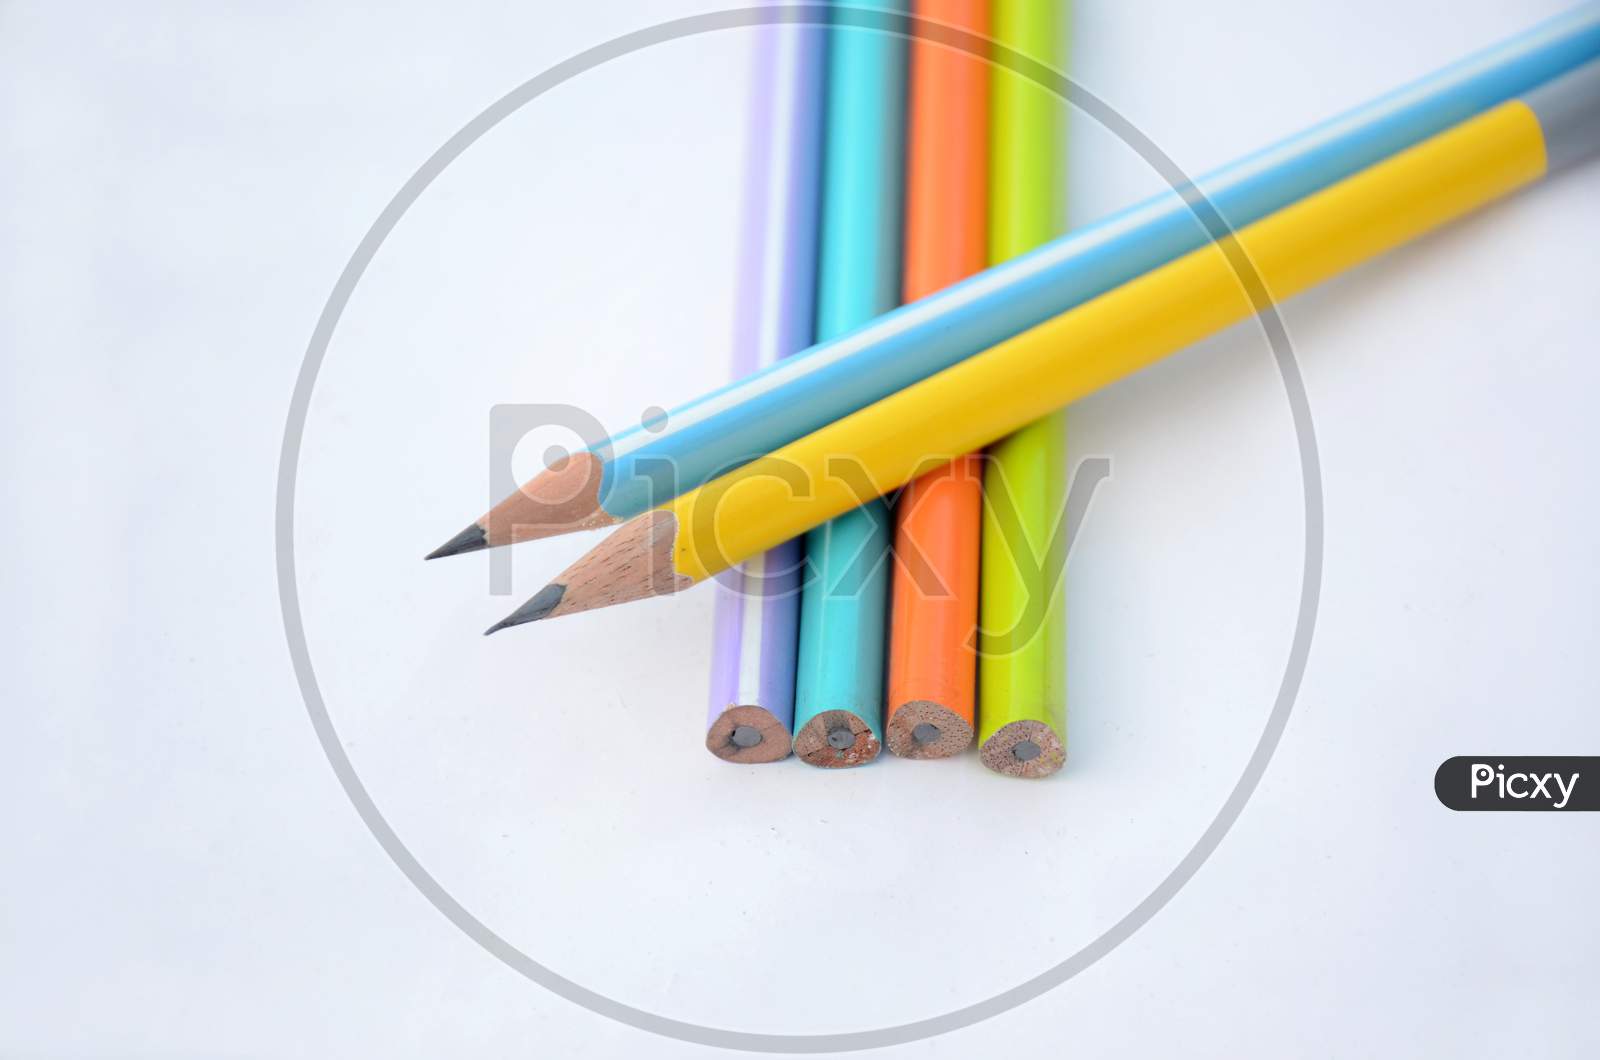 The Yellow Sky Peels Pencil With Bunch The Pencils Isolated On White Background.